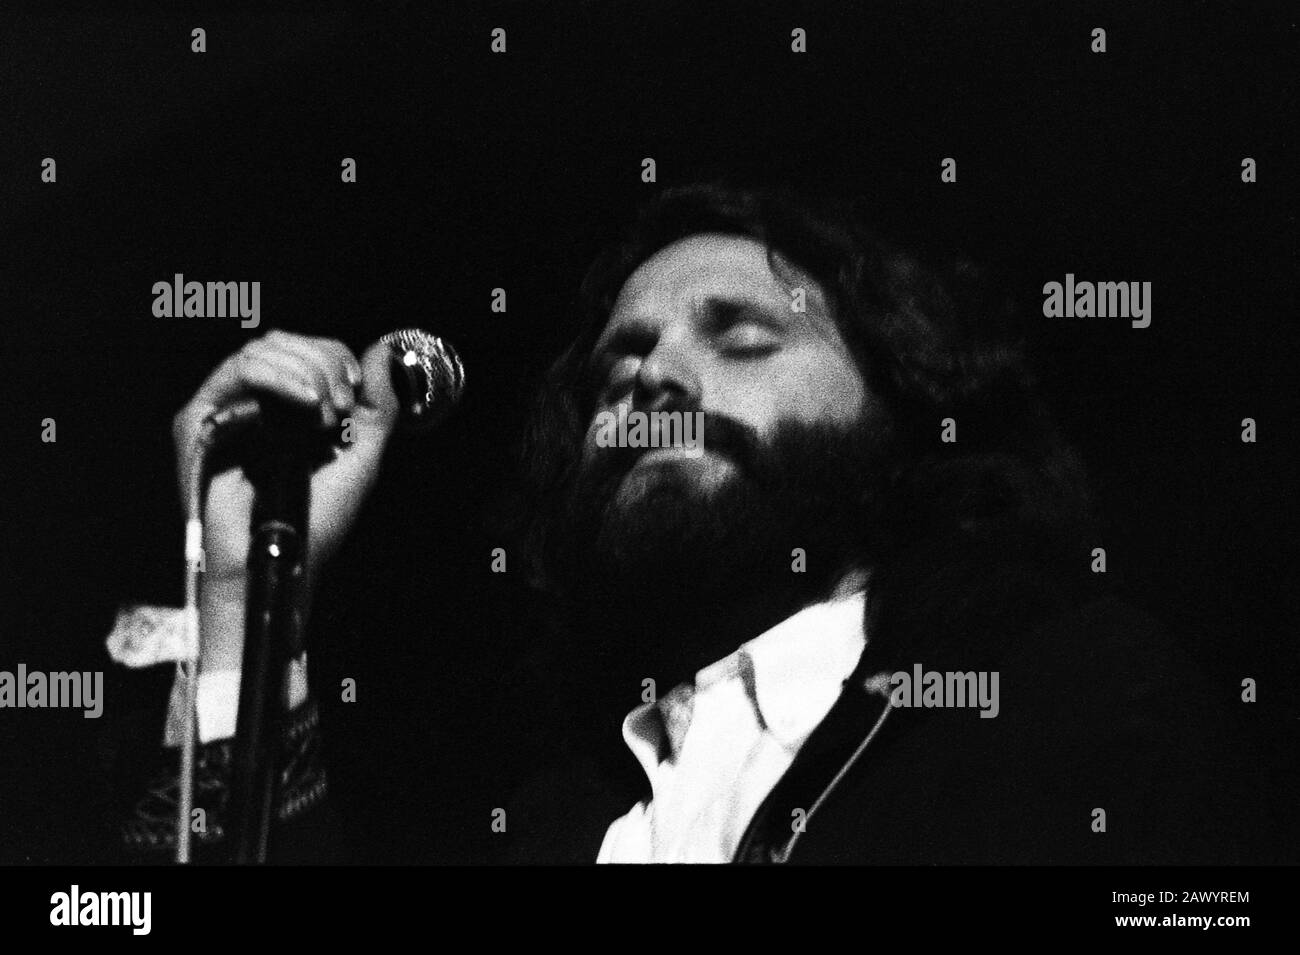 Jim Morrison of the group The Doors at the famous Isle of Wight festival in 1970, it is estimated that between 600 and 700,000 people attended. Saturday August 29, 1970 Stock Photo